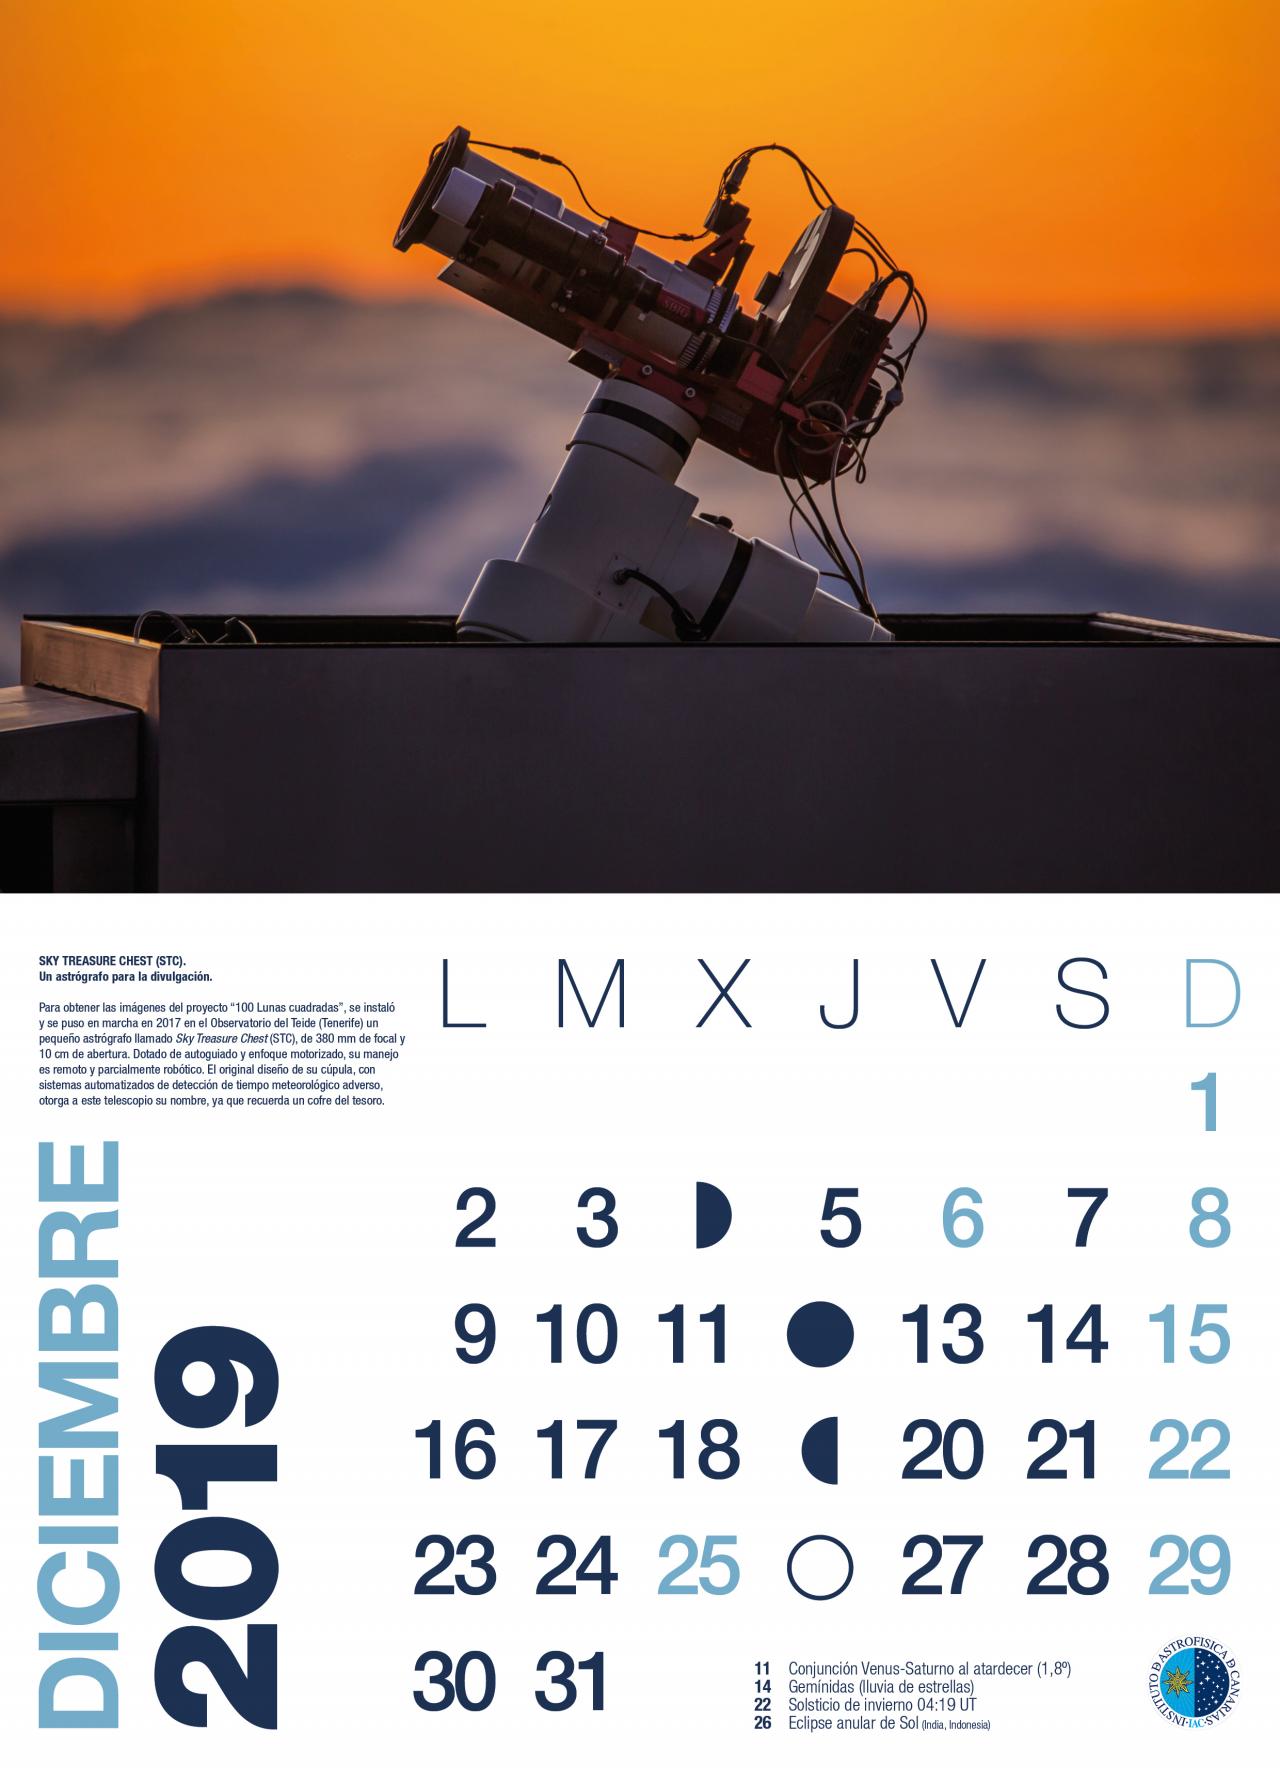 December 2019 in the 100 Square moons calendar